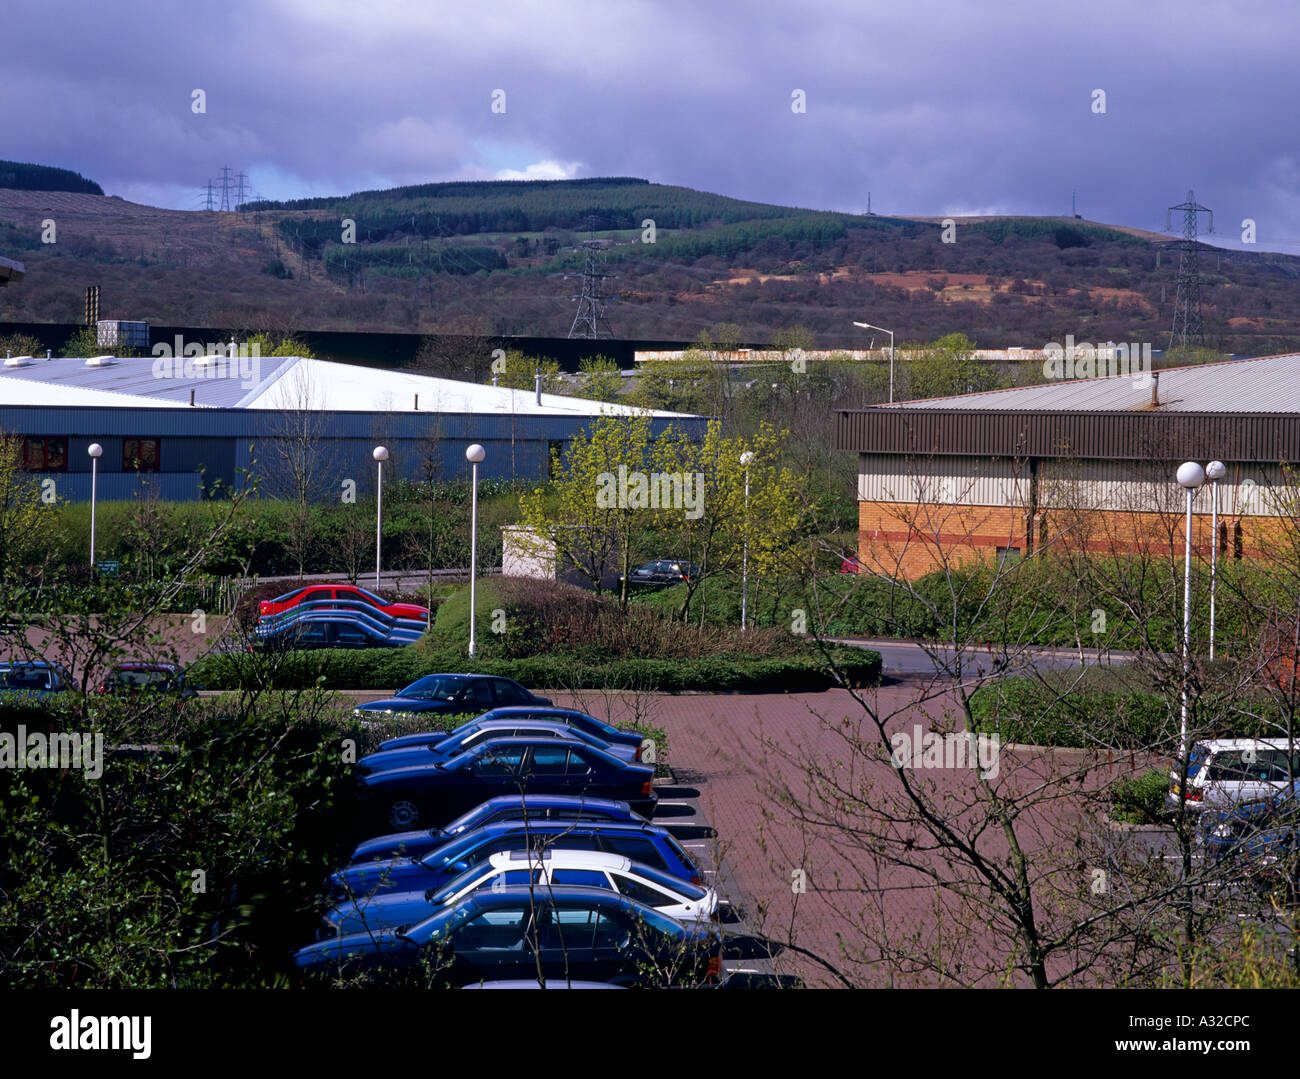 Technology park with parked cars Methyr Tydfil Mid Glamorgan Wales UK Stock Photo